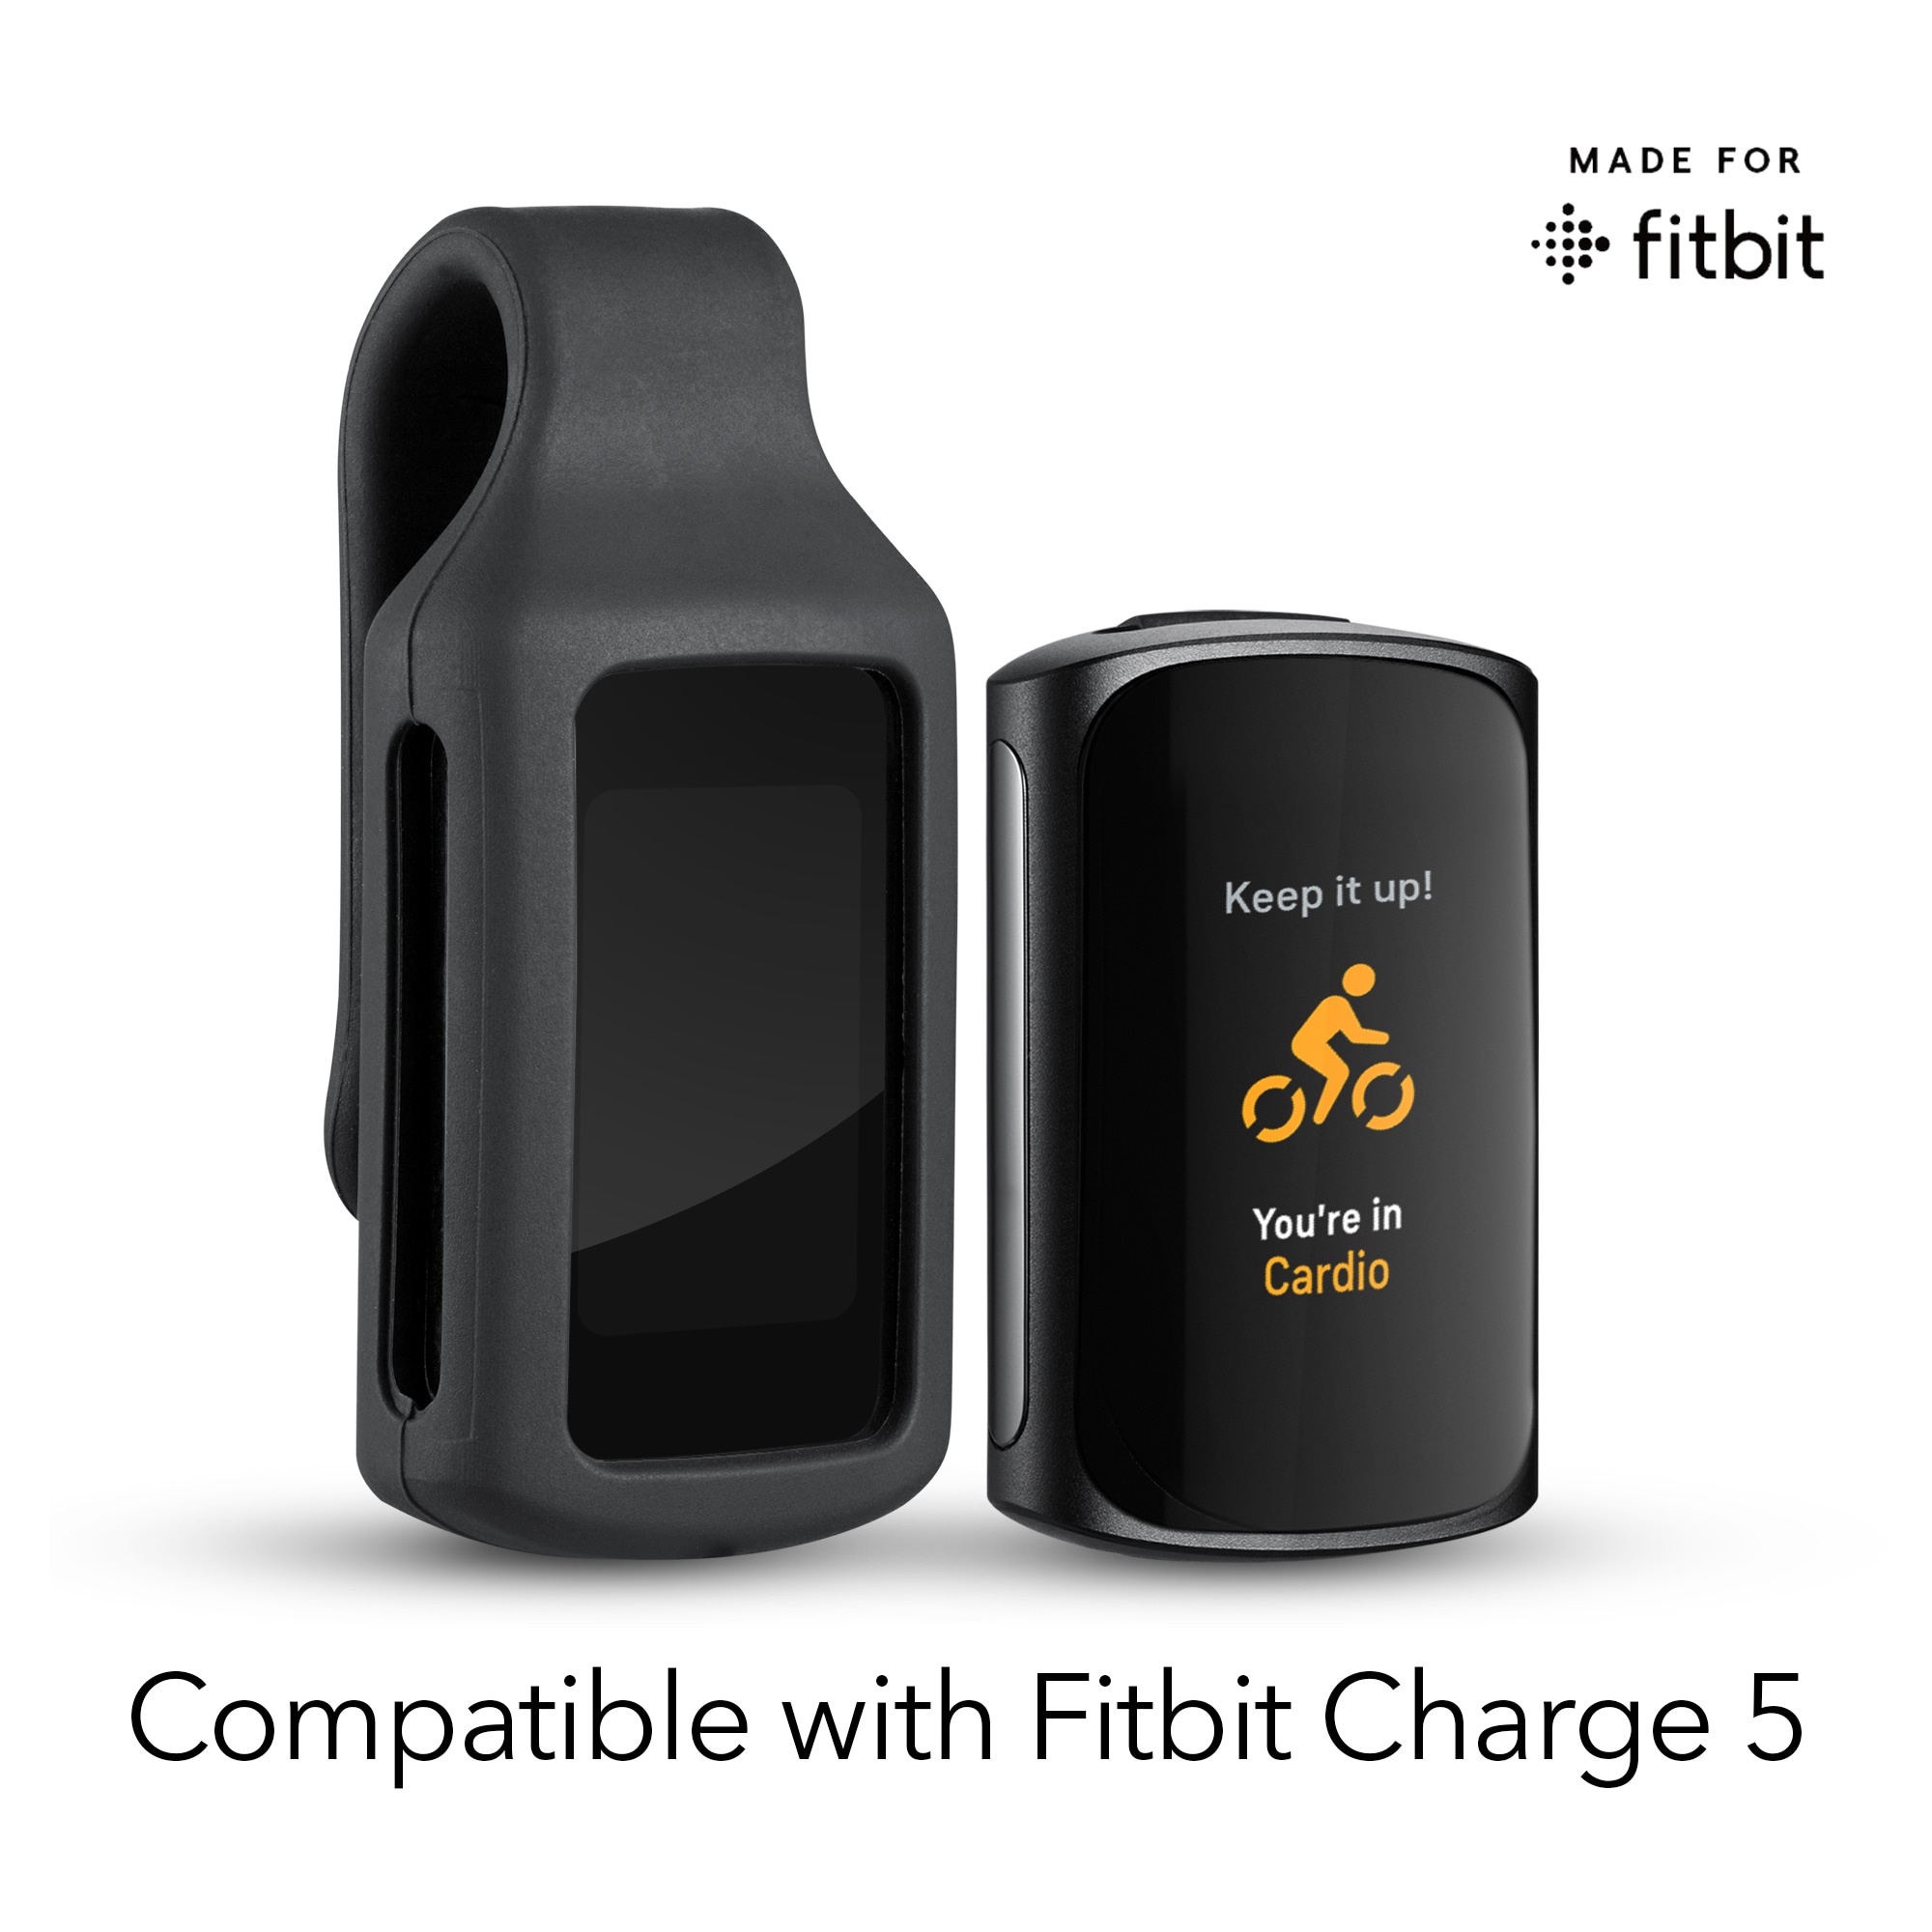 Wasserstein Clip Holder Compatible with Fitbit Charge 5